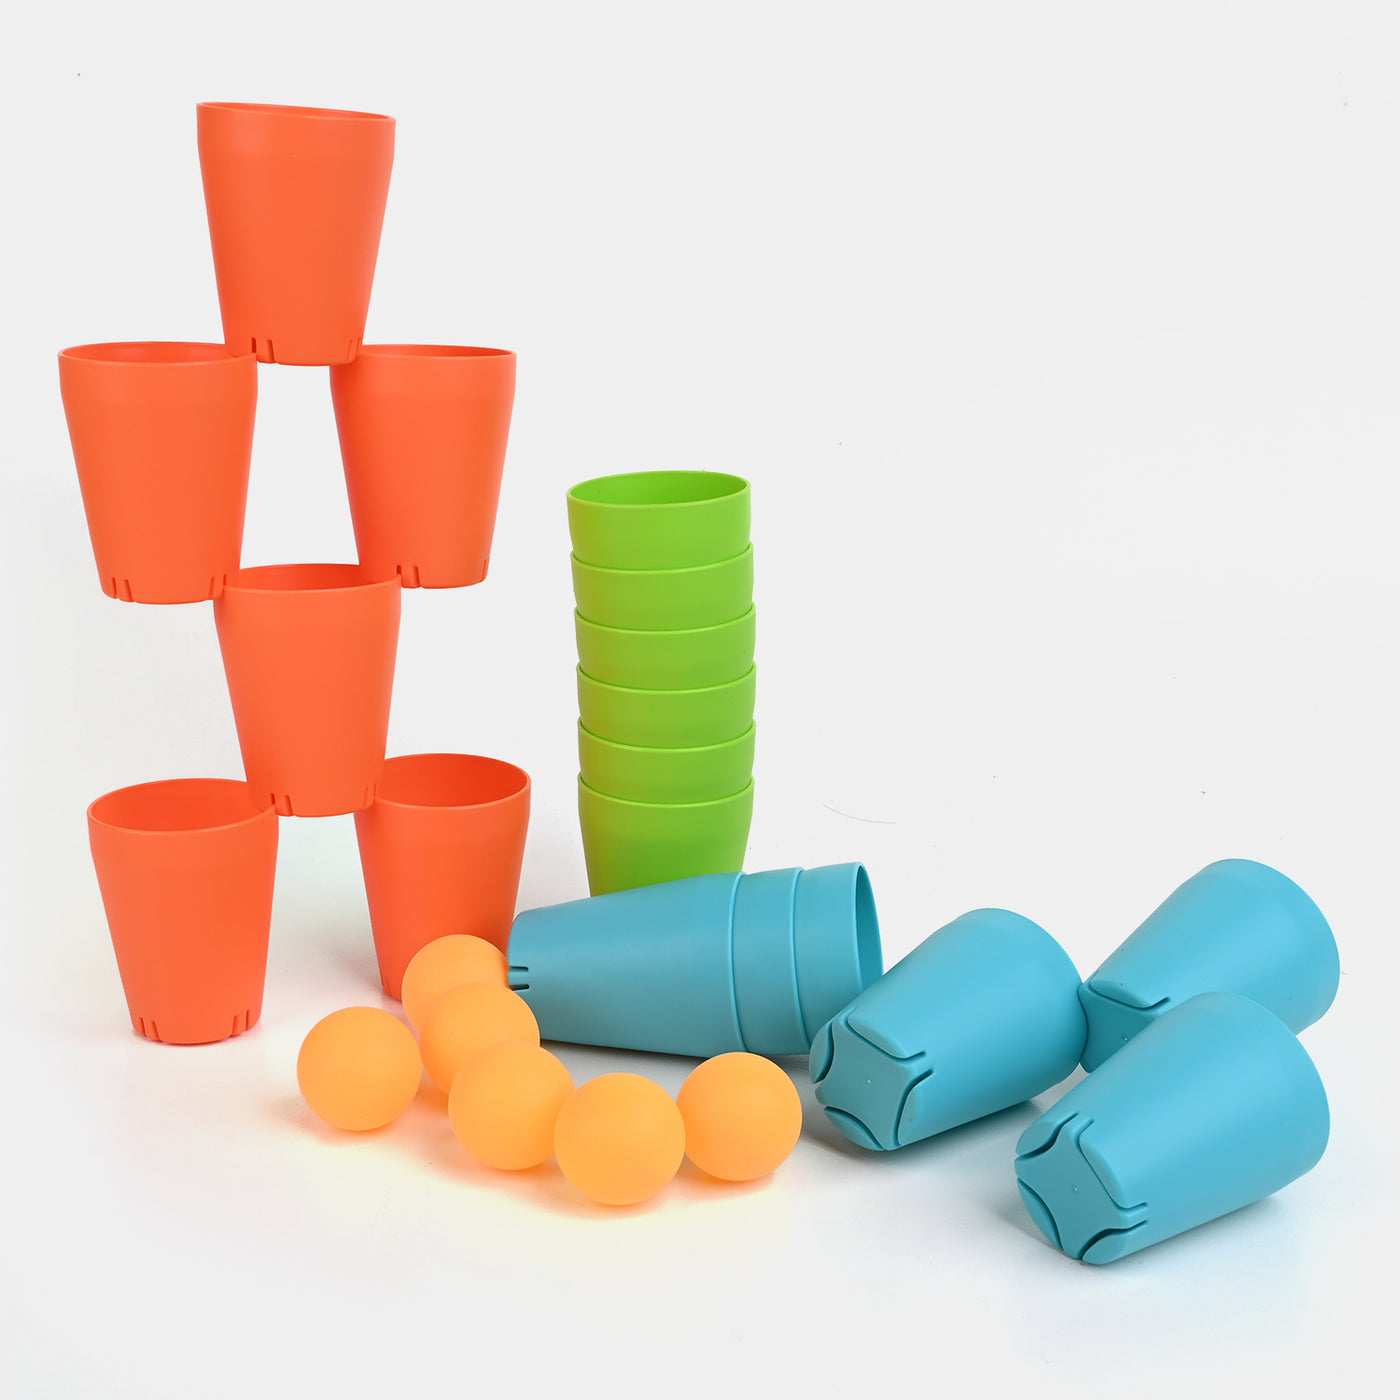 3in1 Quick Stacking Cup Puzzle Game Pay Set